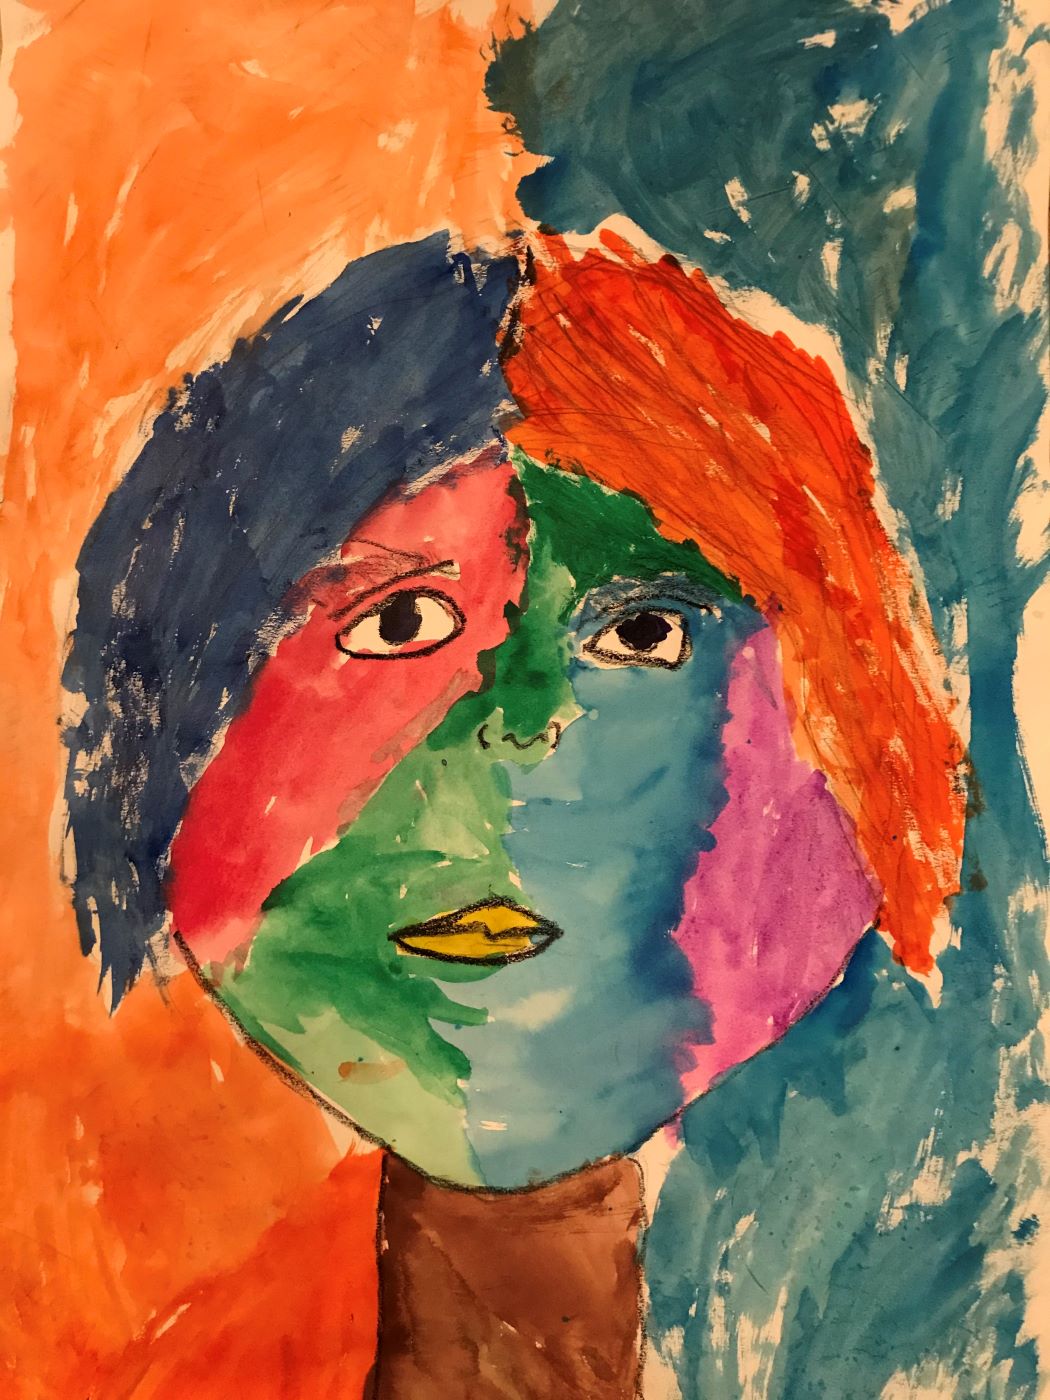 Painting of a colorful face